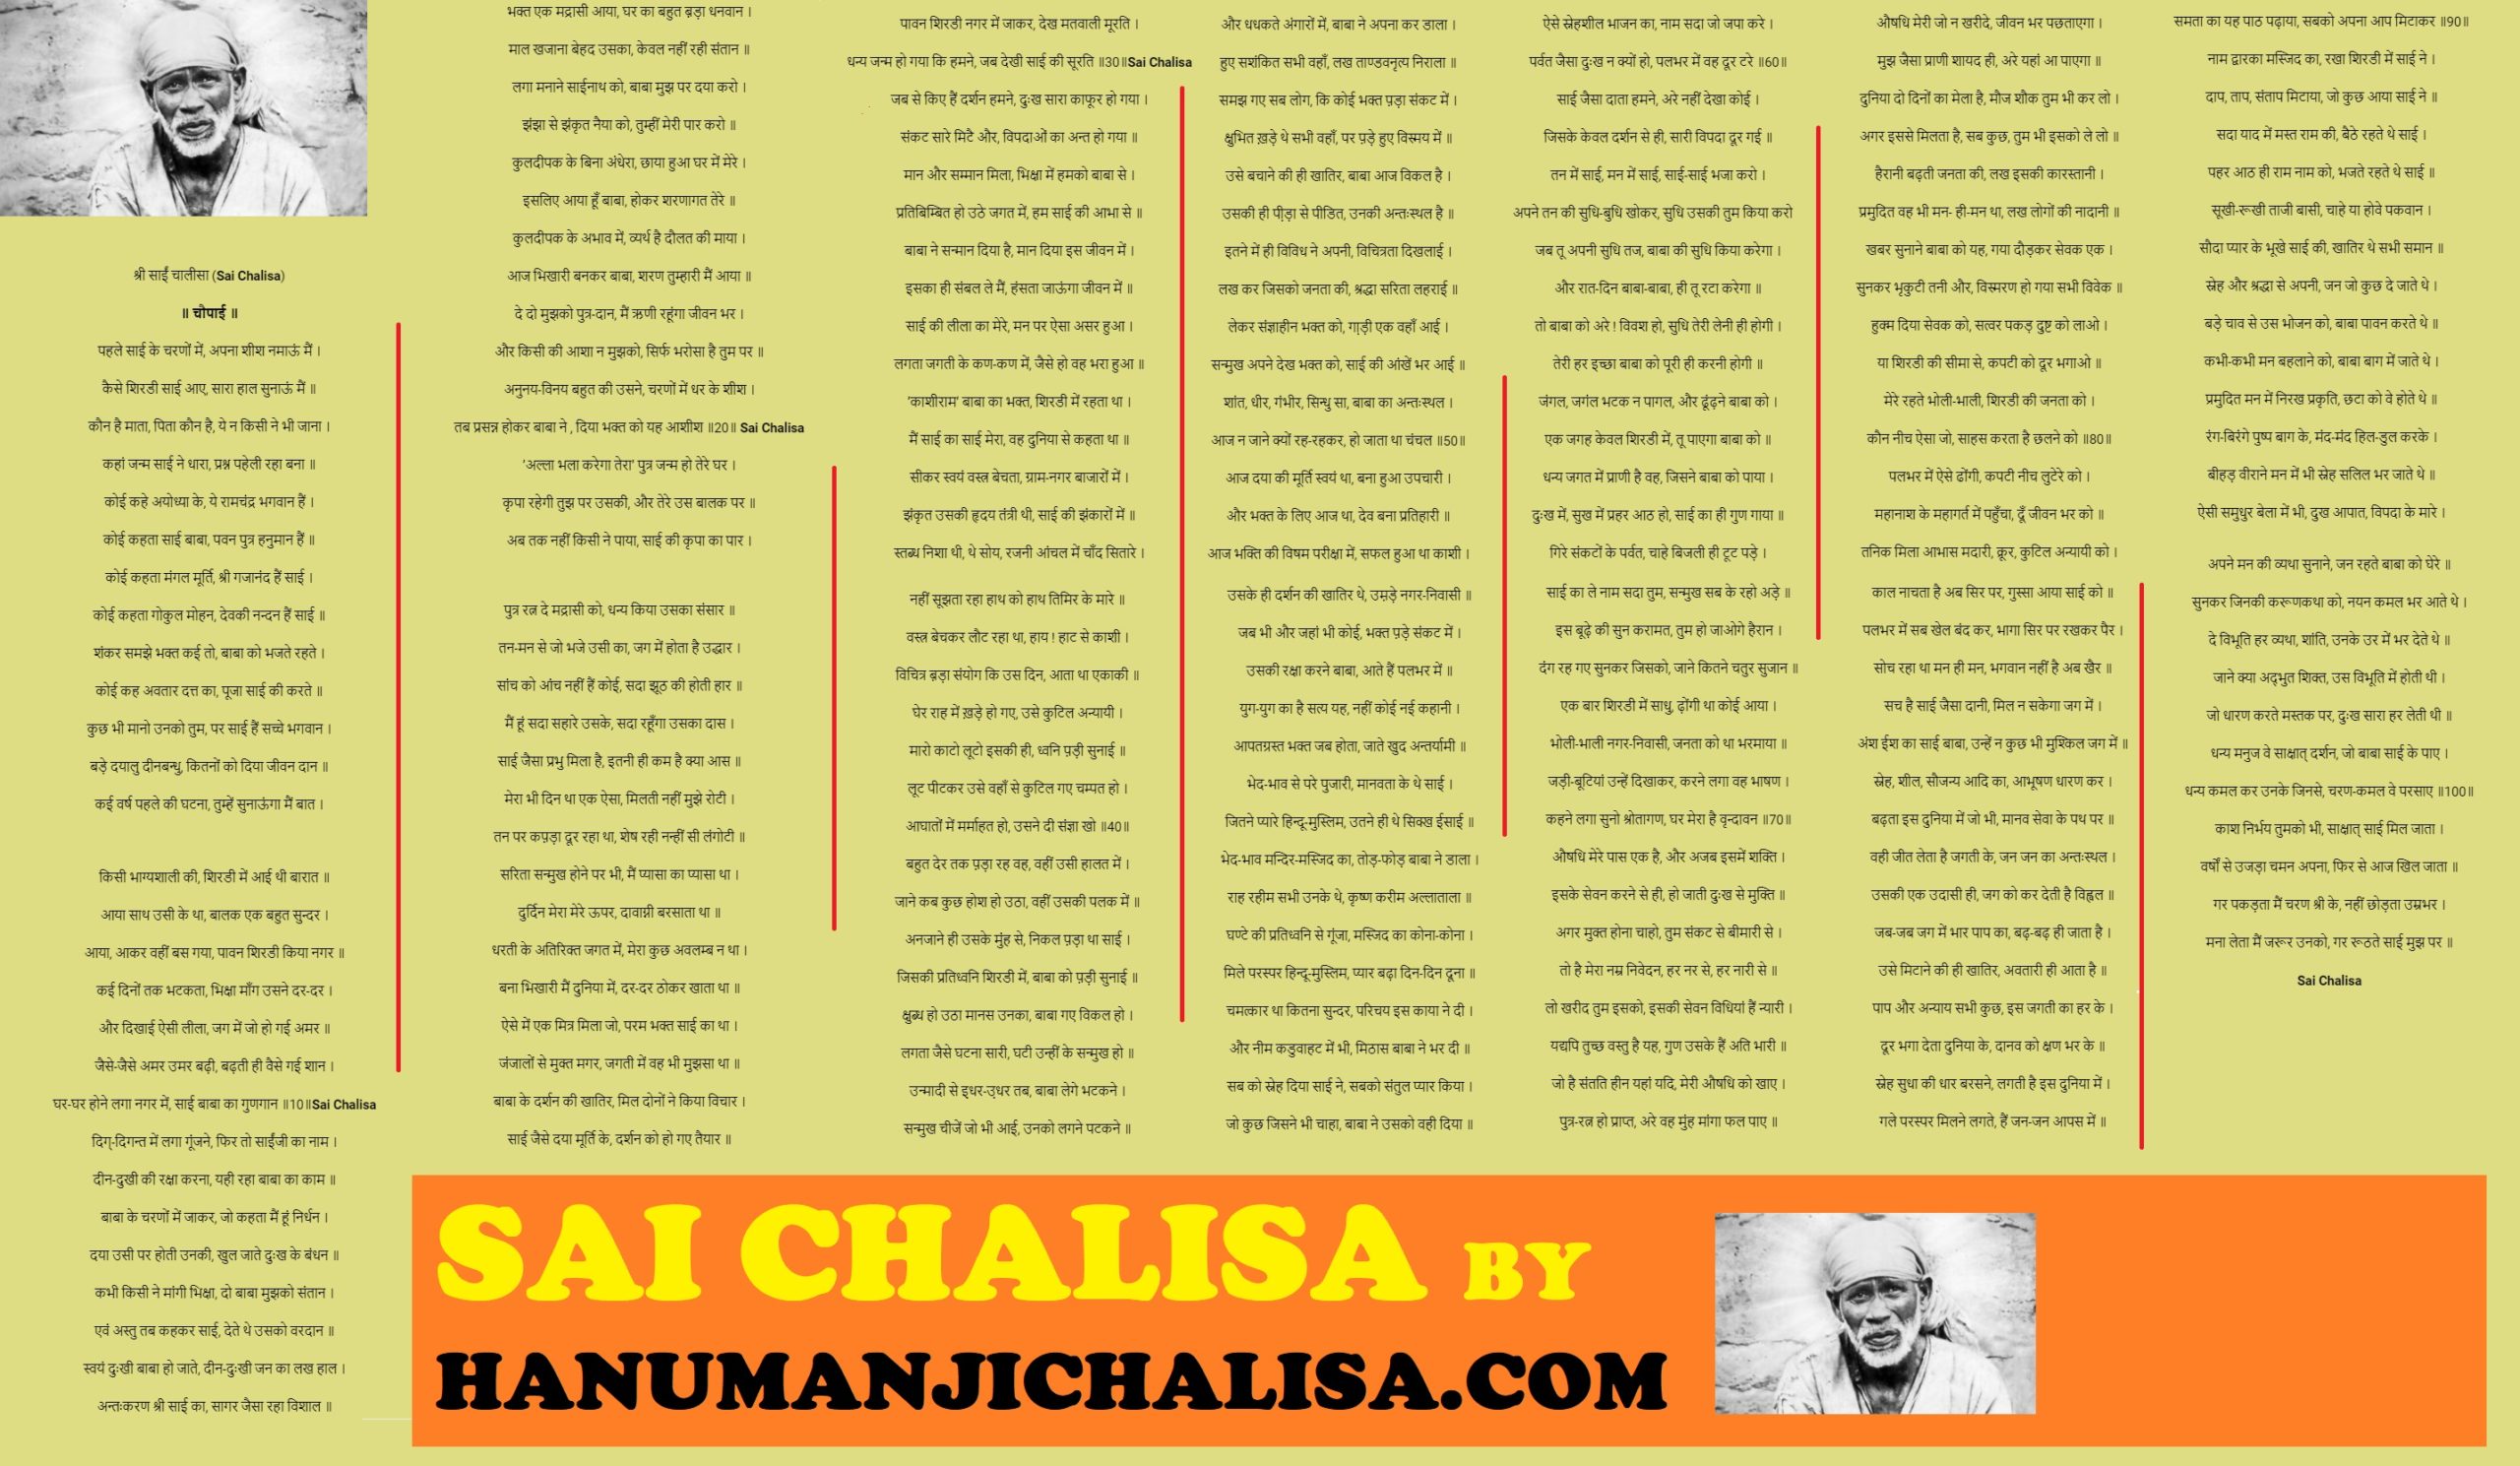 All Sai Chalisa in One page for free download, special edition of Sai Chalisa